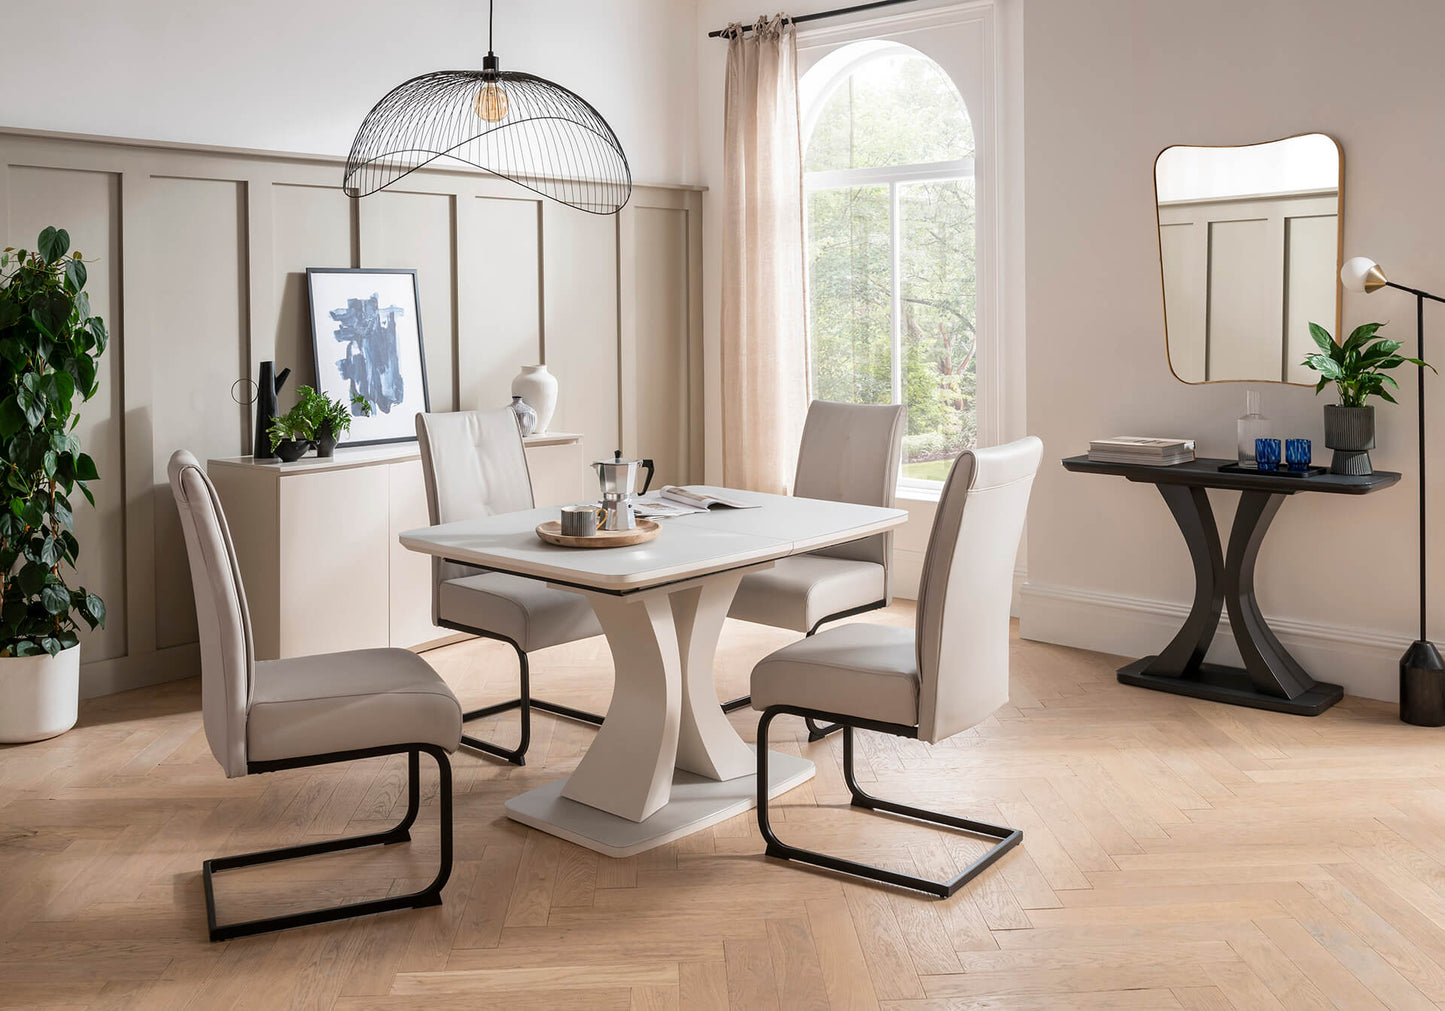 Daiva Dining Chair Natural